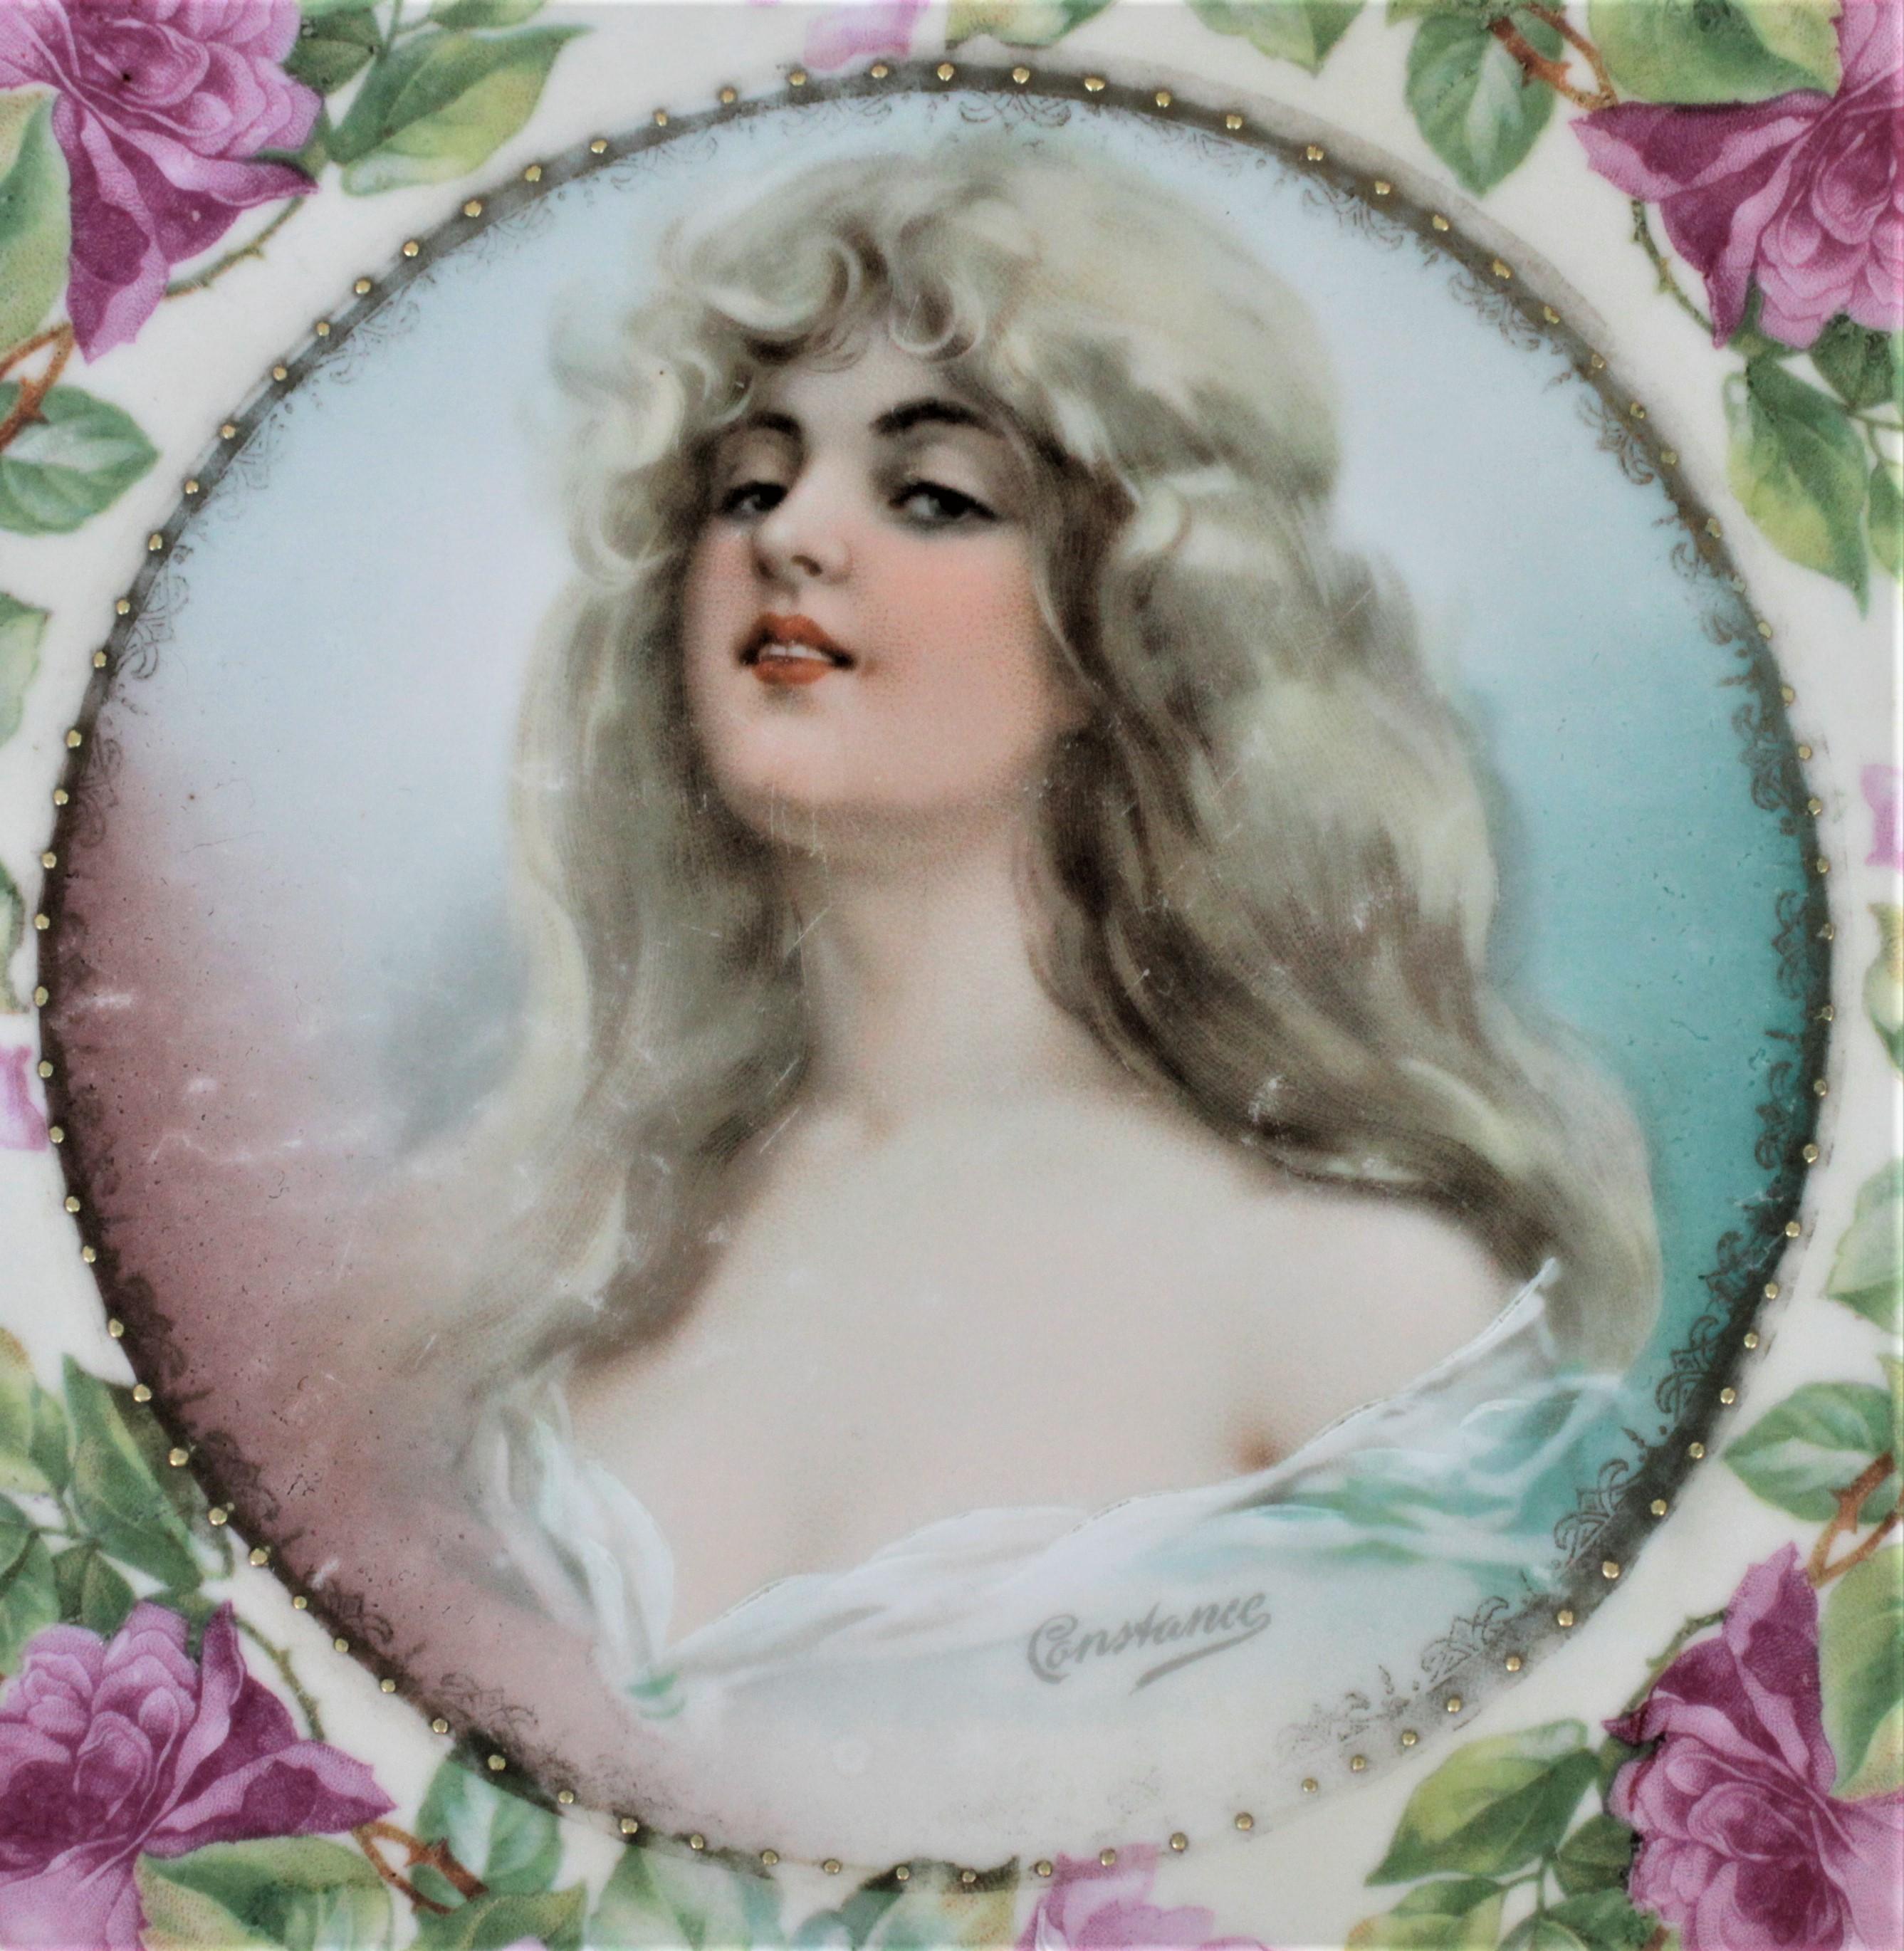 This antique portrait plate was made by the MZ Austria porcelain factory in circa 1908 in the late Victorian style. The plate features a young blonde female in a provocative pose for the time period, signed 